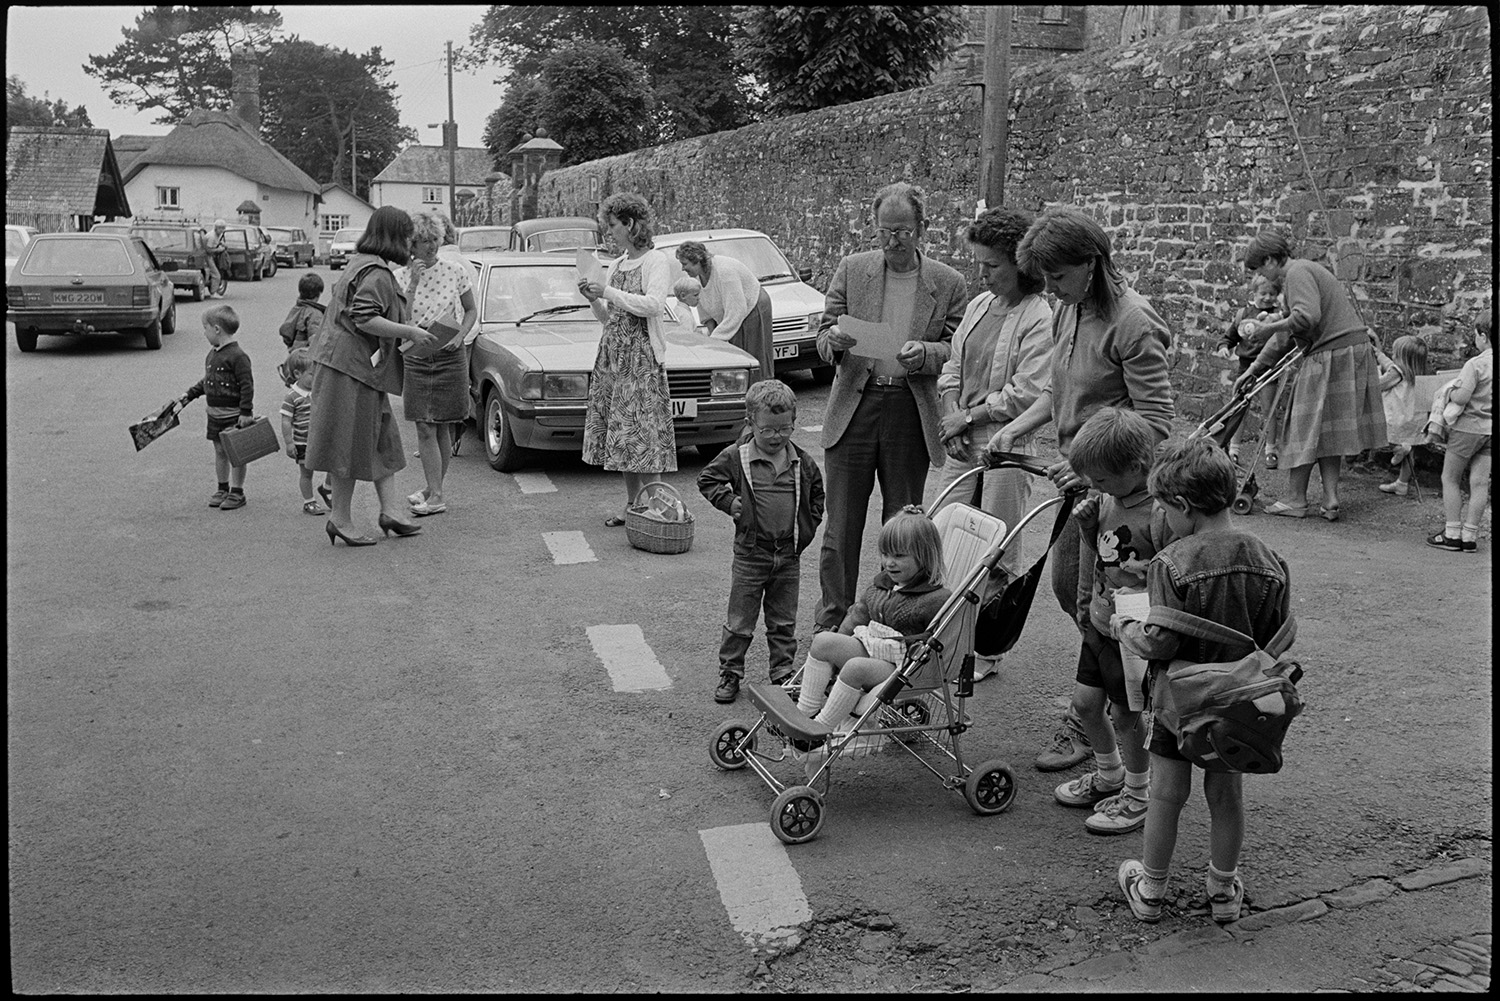 Women, mothers and children after school.
[Parents and children talking by a stone wall outside the school at Chulmleigh. Parked cars and cottages can be seen in the background.]